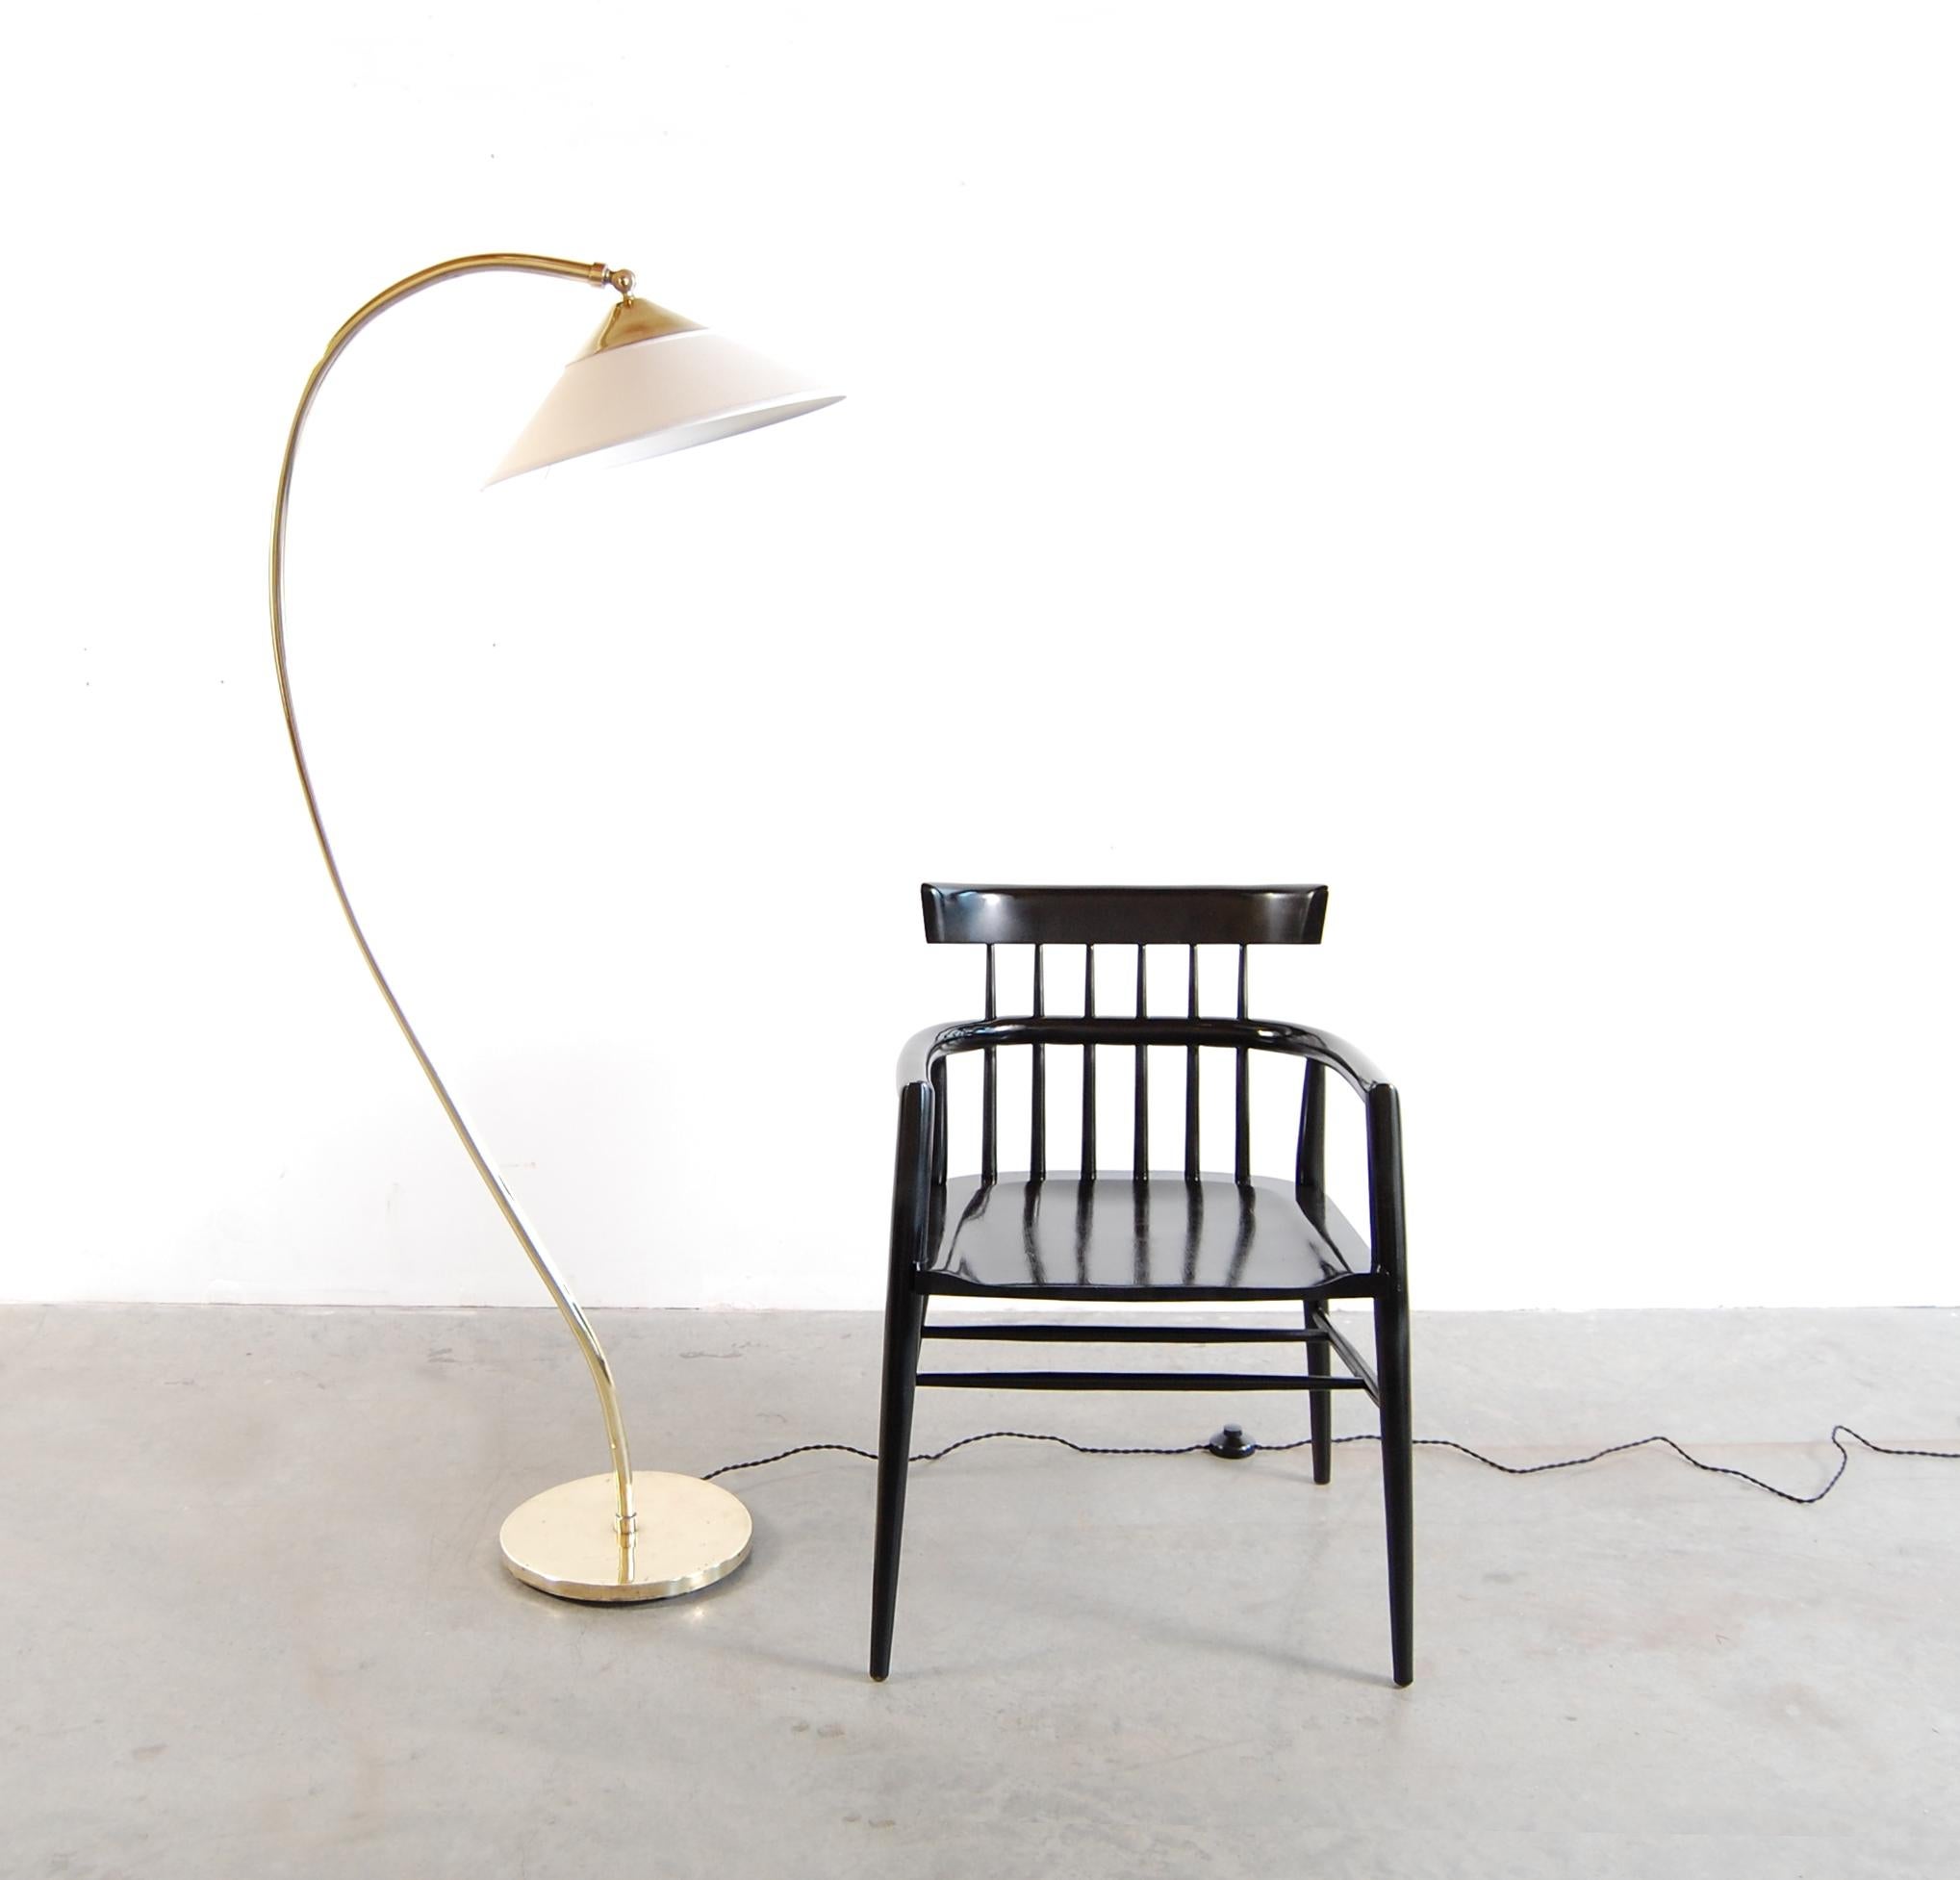 Brass floor lamp with adjustable linen shade, designed by Kurt Versen, circa 1948. New shade, re-wired including new, high quality foot switch.